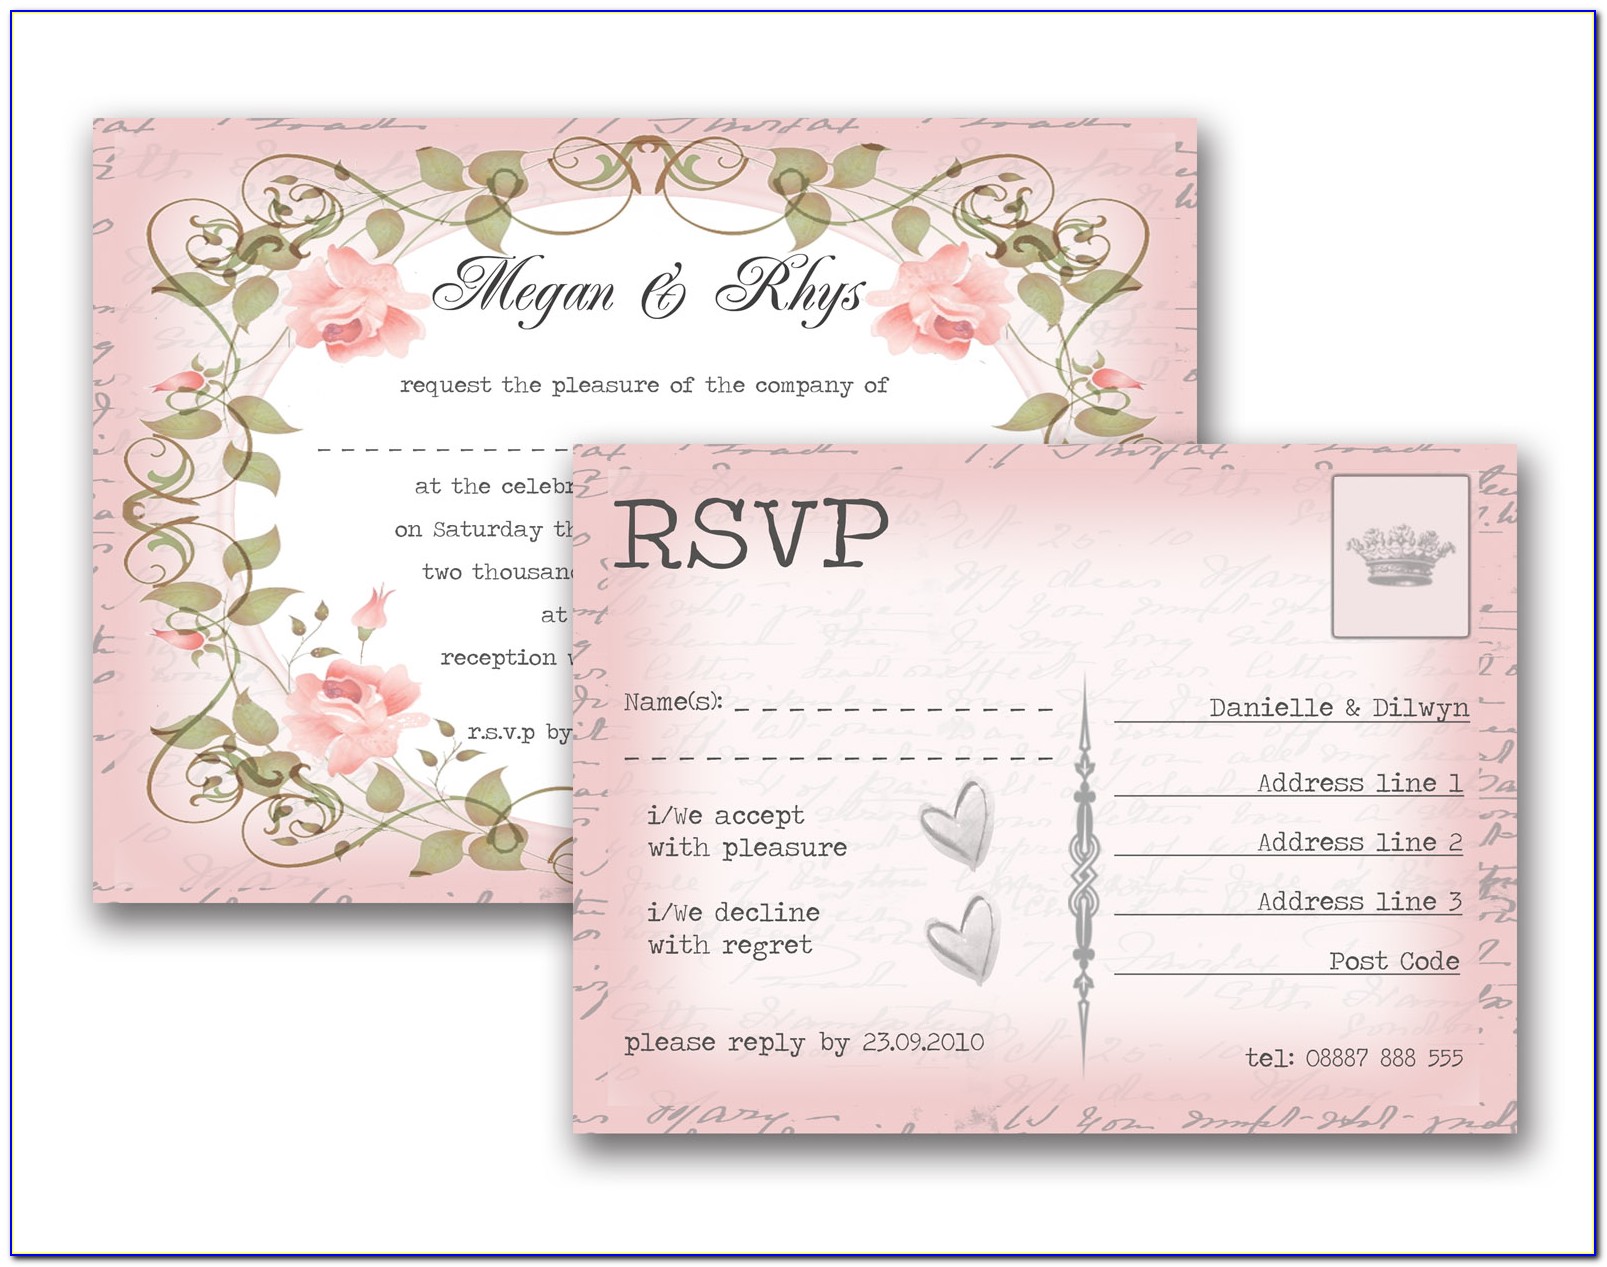 Full Form Of Rsvp In Indian Wedding Cards